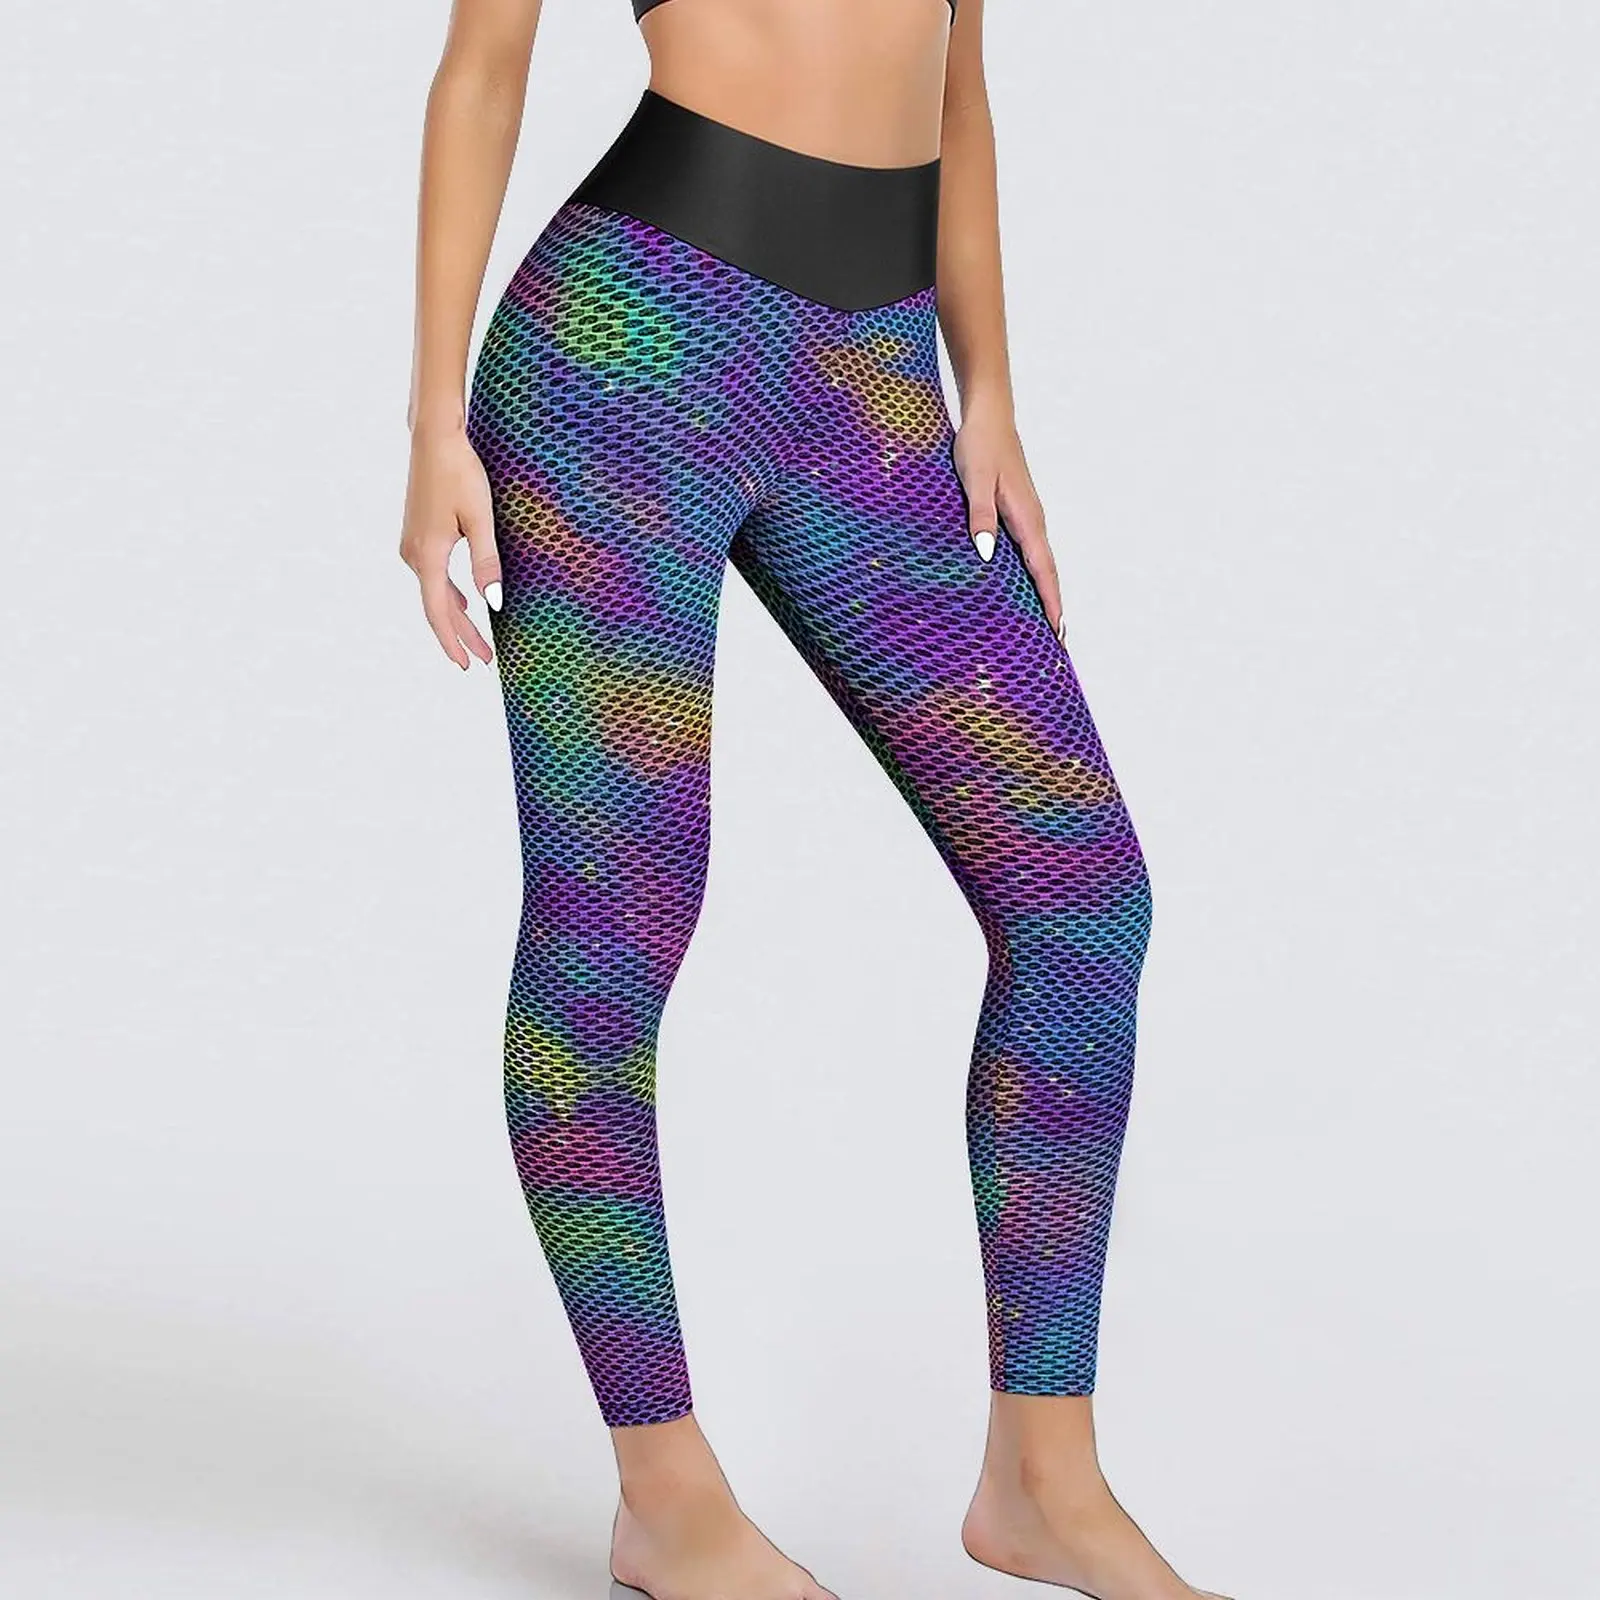 Abstract Star Print Leggings Pastel Galaxy Running Yoga Pants Lady High Waist Novelty Leggins Sexy Stretchy Graphic Sport Tights